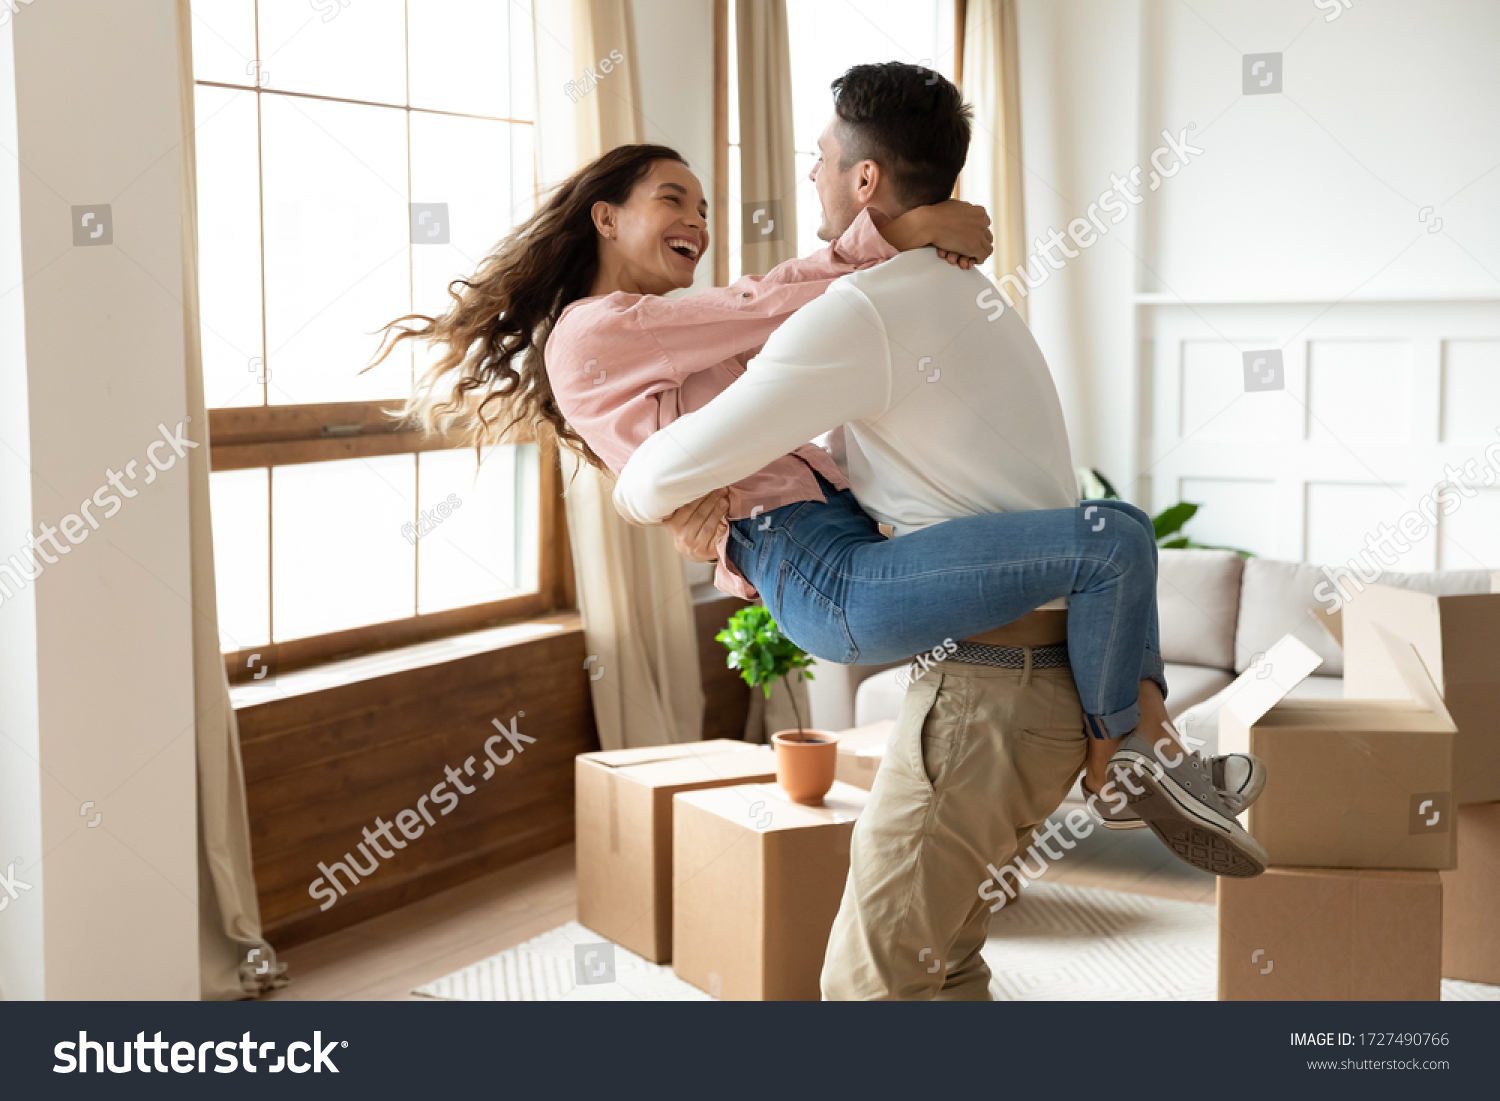 Loving husband lifting excited wife, celebrating moving day, having fun in modern living room with cardboard boxes with belongings, happy young couple purchasing new house, mortgage and relocation #1727490766